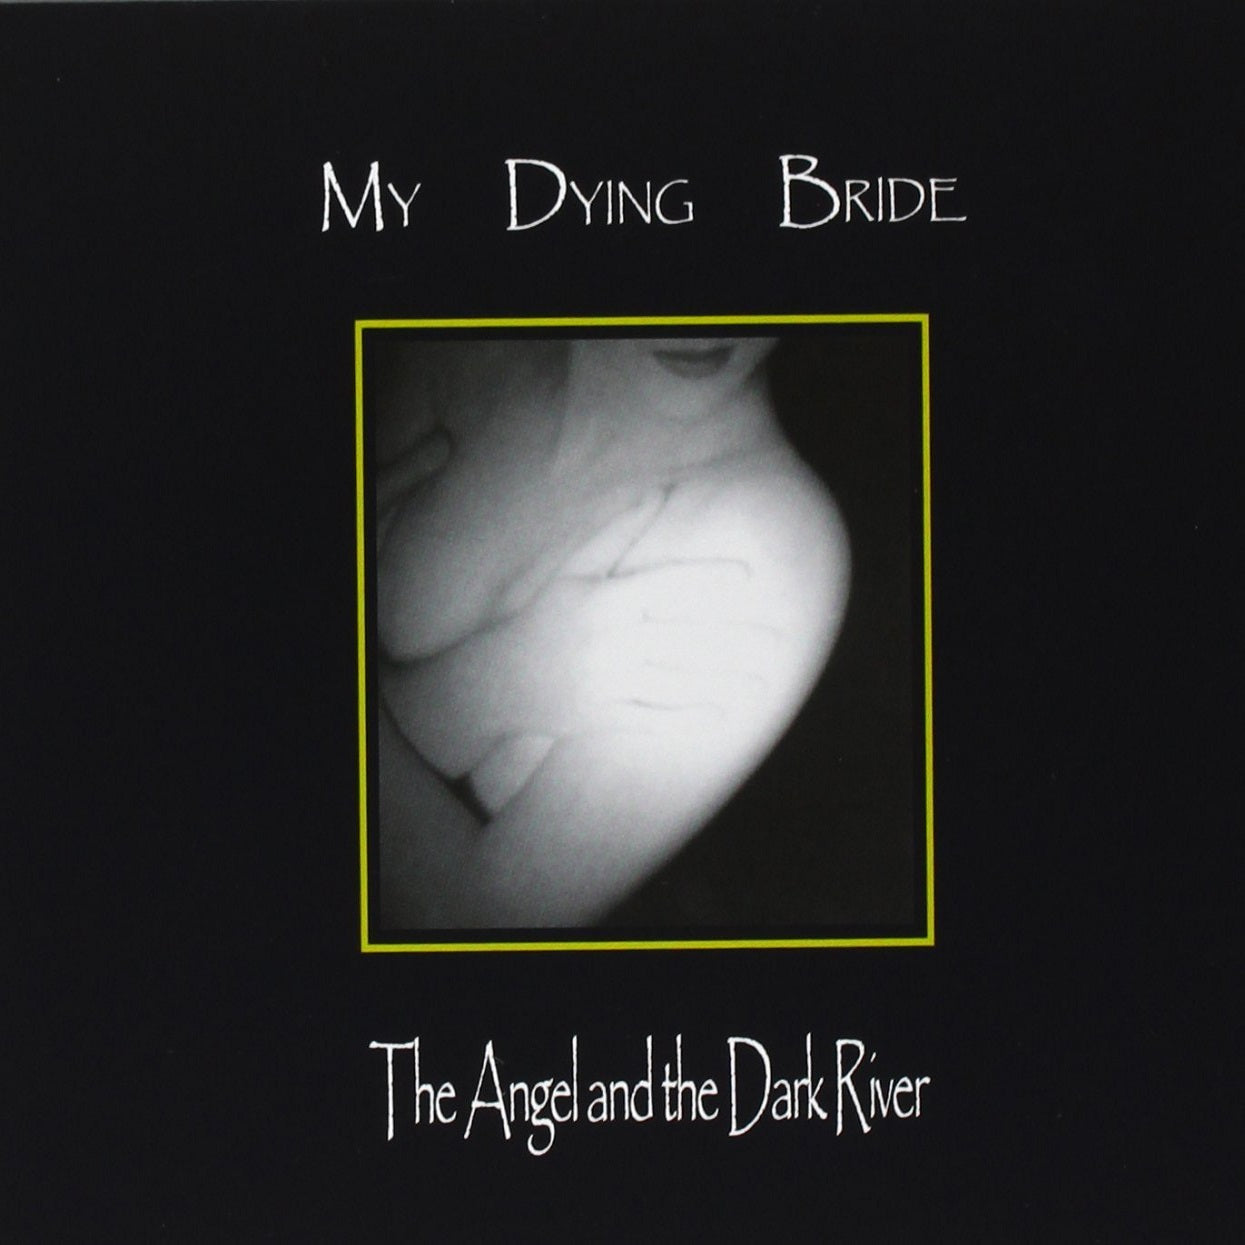 MY DYING BRIDE - THE ANGEL AND THE DARK RIVER Vinyl 2xLP